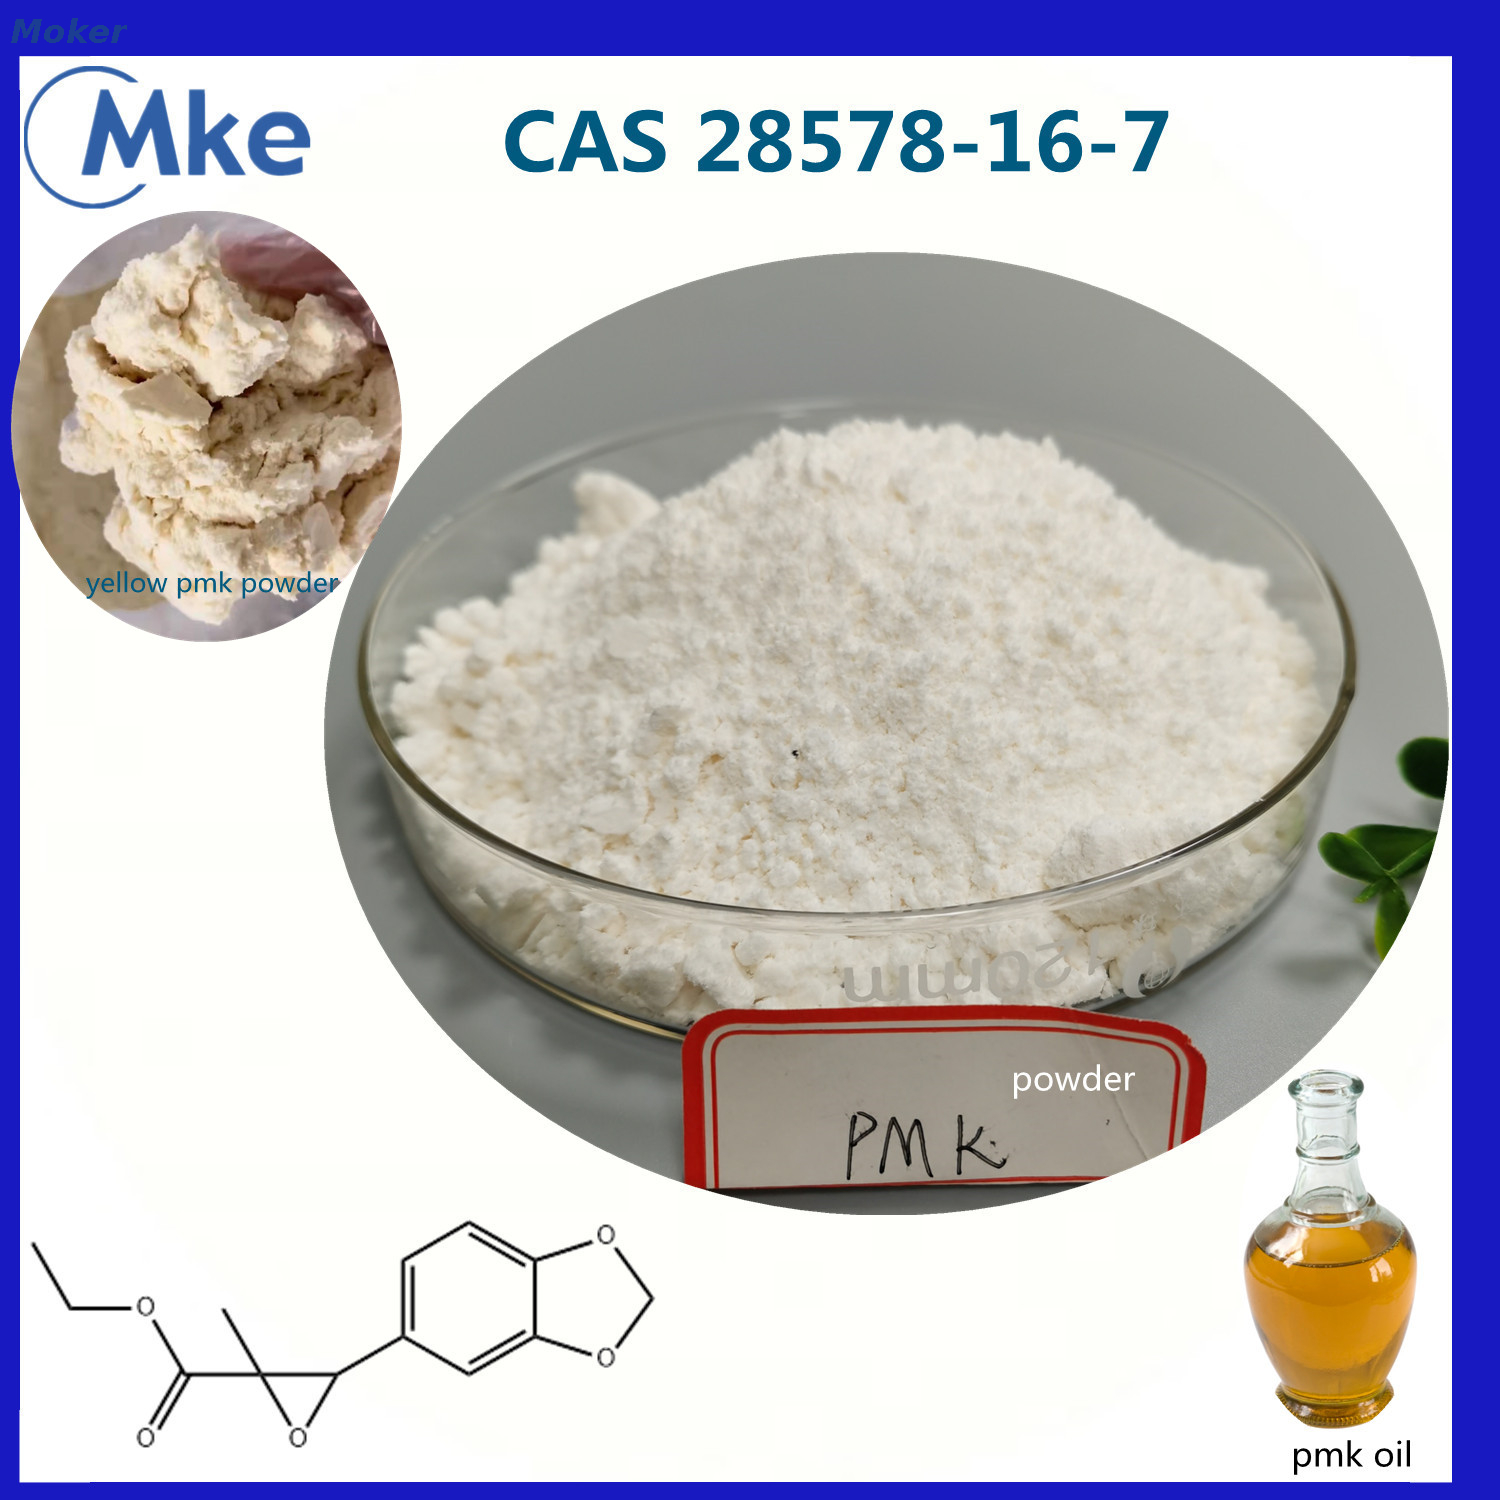 Wholesale price New Pmk powder Cas 28578-16-7 with high oil yield